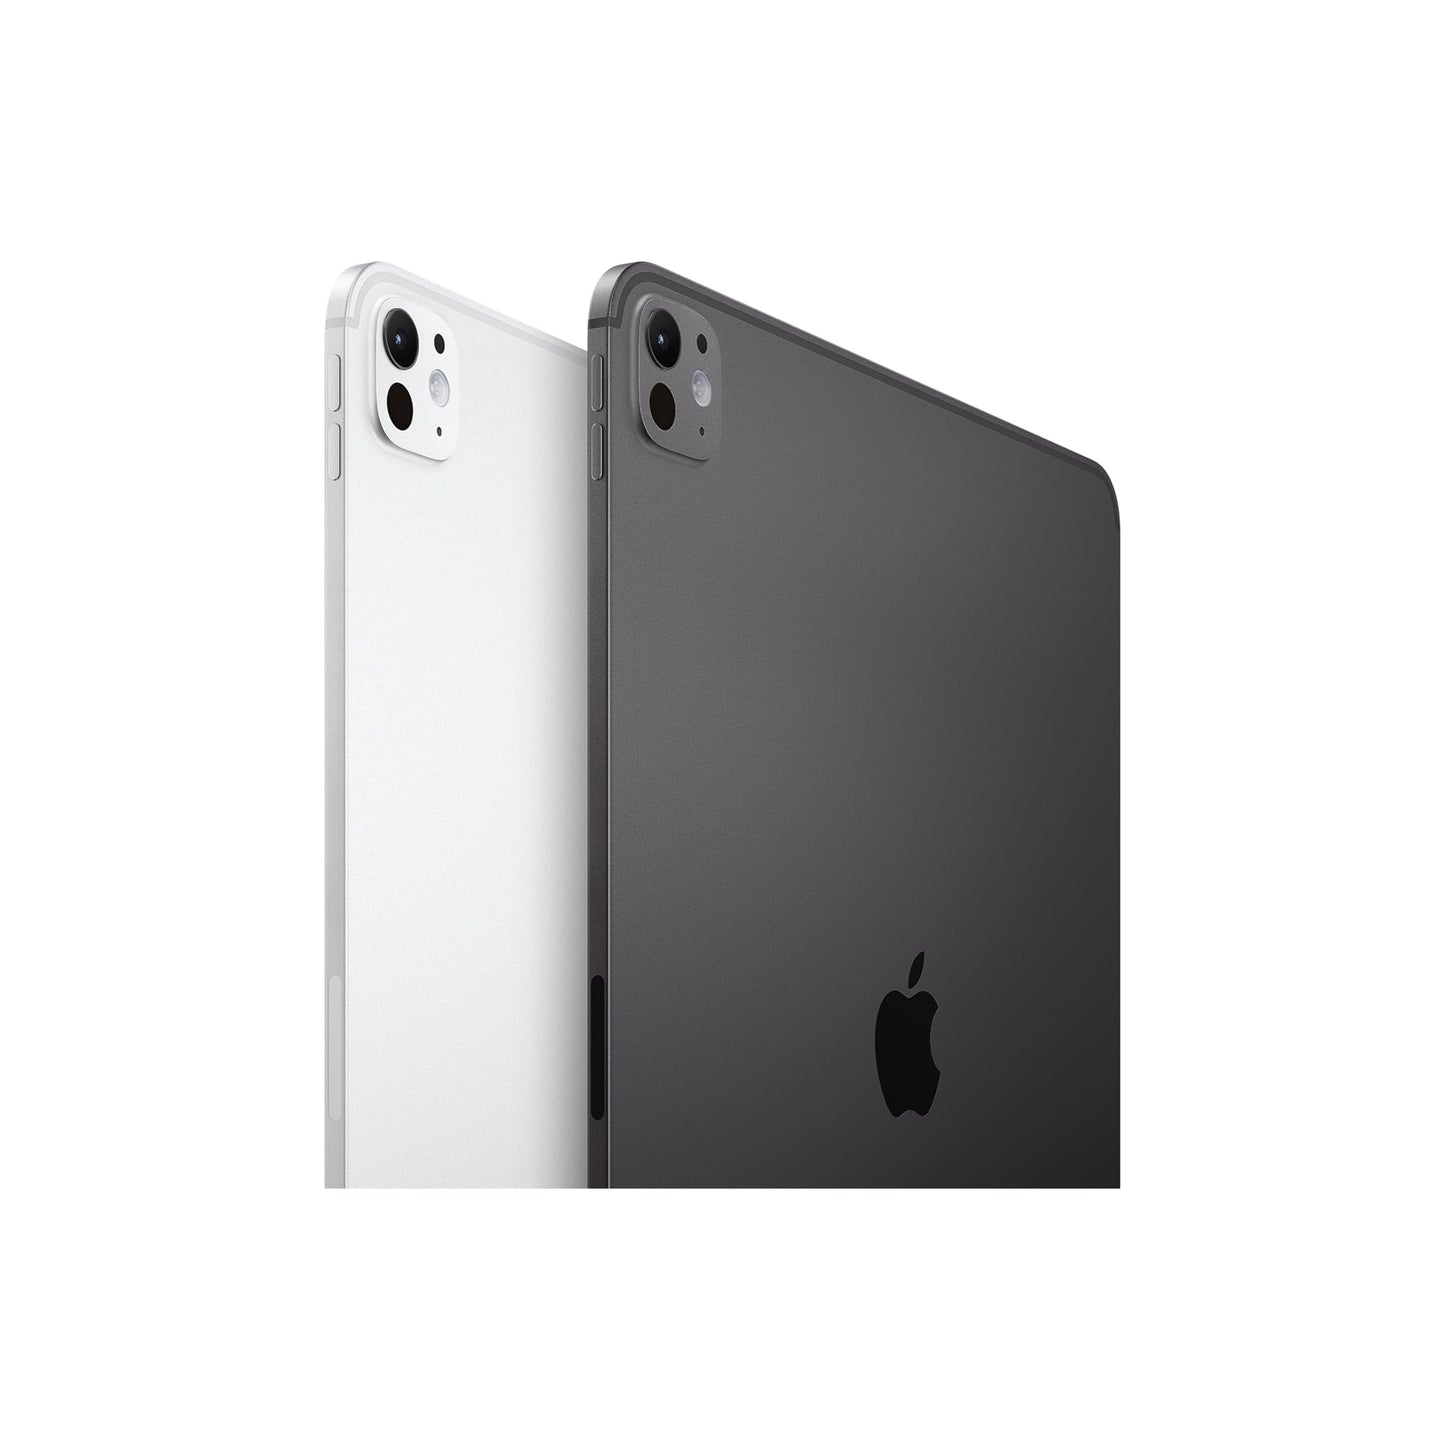 Apple iPad Pro 11-Inch (M4): Ultra Retina XDR Display, 256GB, Landscape 12MP Front Camera/12MP Back Camera, LiDAR Scanner, Wi-Fi 6E + 5G Cellular with eSIM, Face ID, All-Day Battery Life — Silver